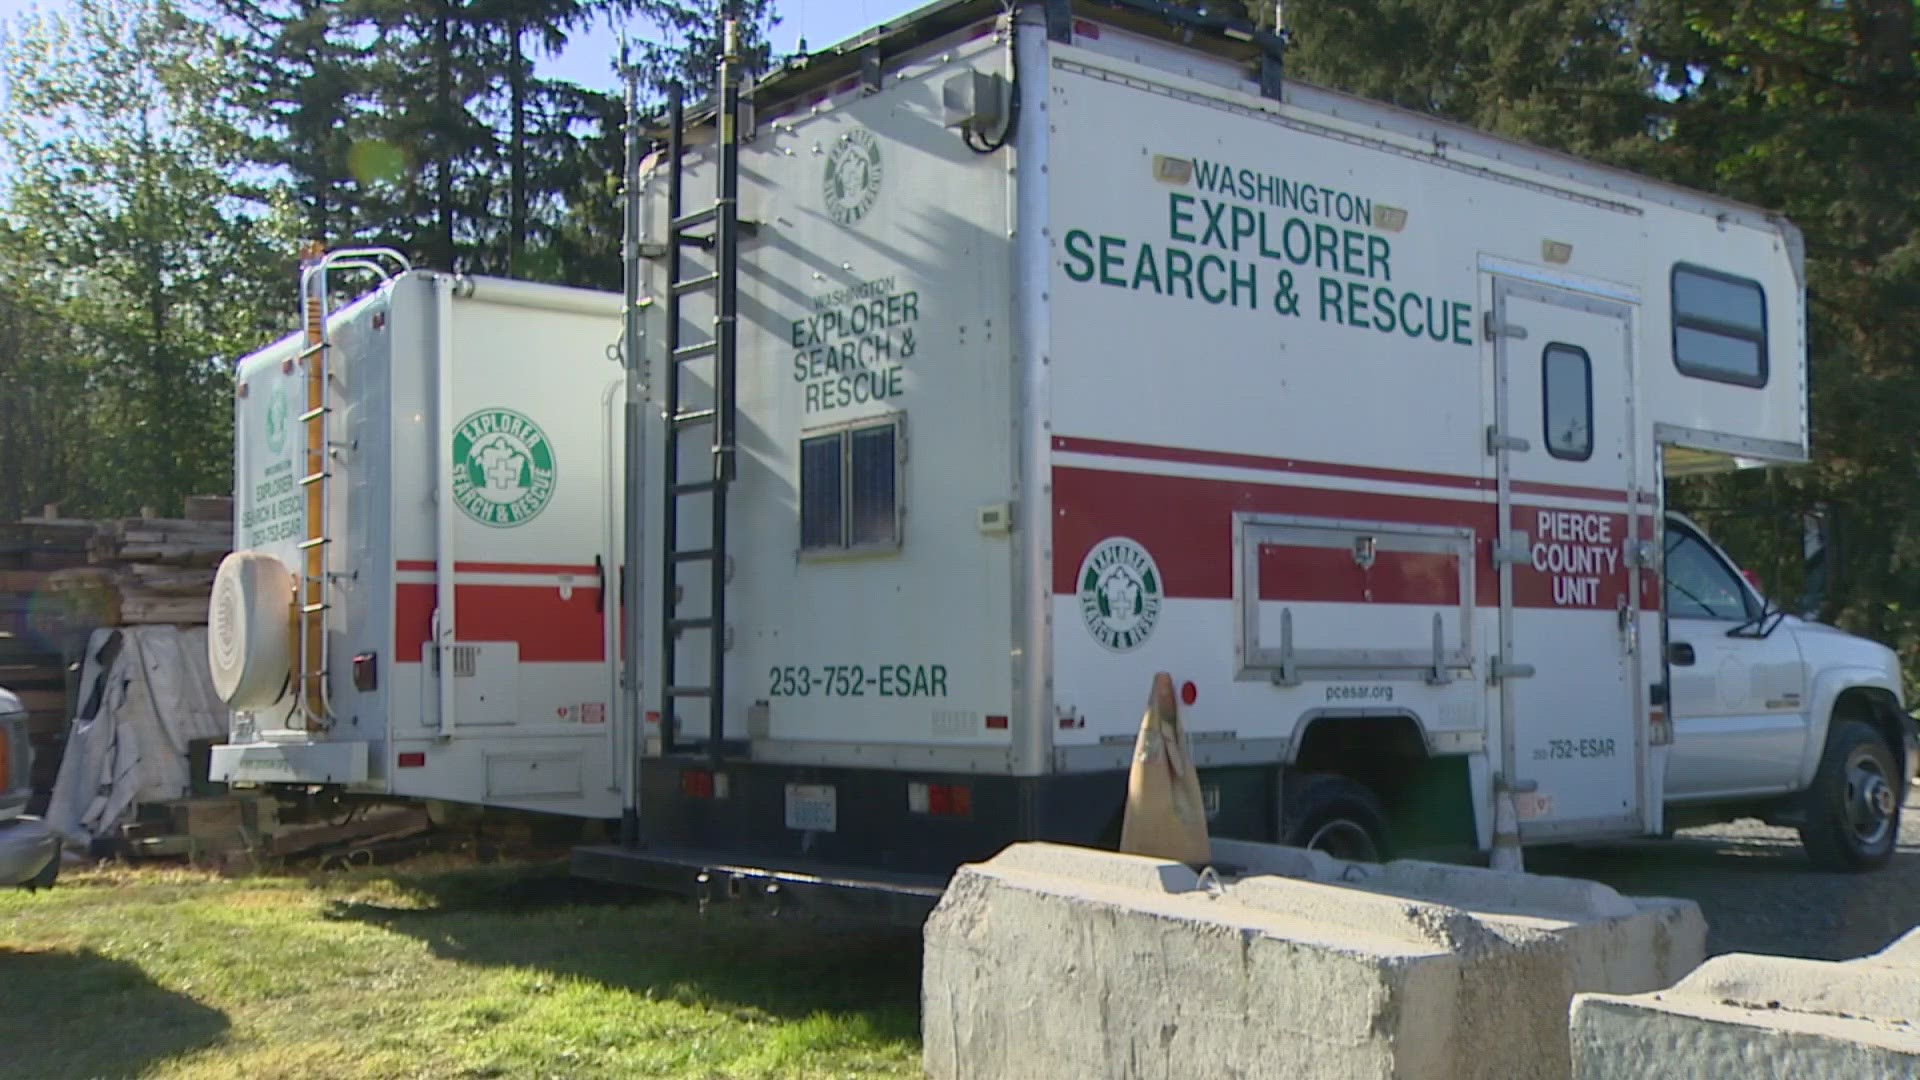 A volunteer-led search and rescue team in Pierce County is missing vital equipment after being burglarized ahead of what's expected to be a busy weekend.